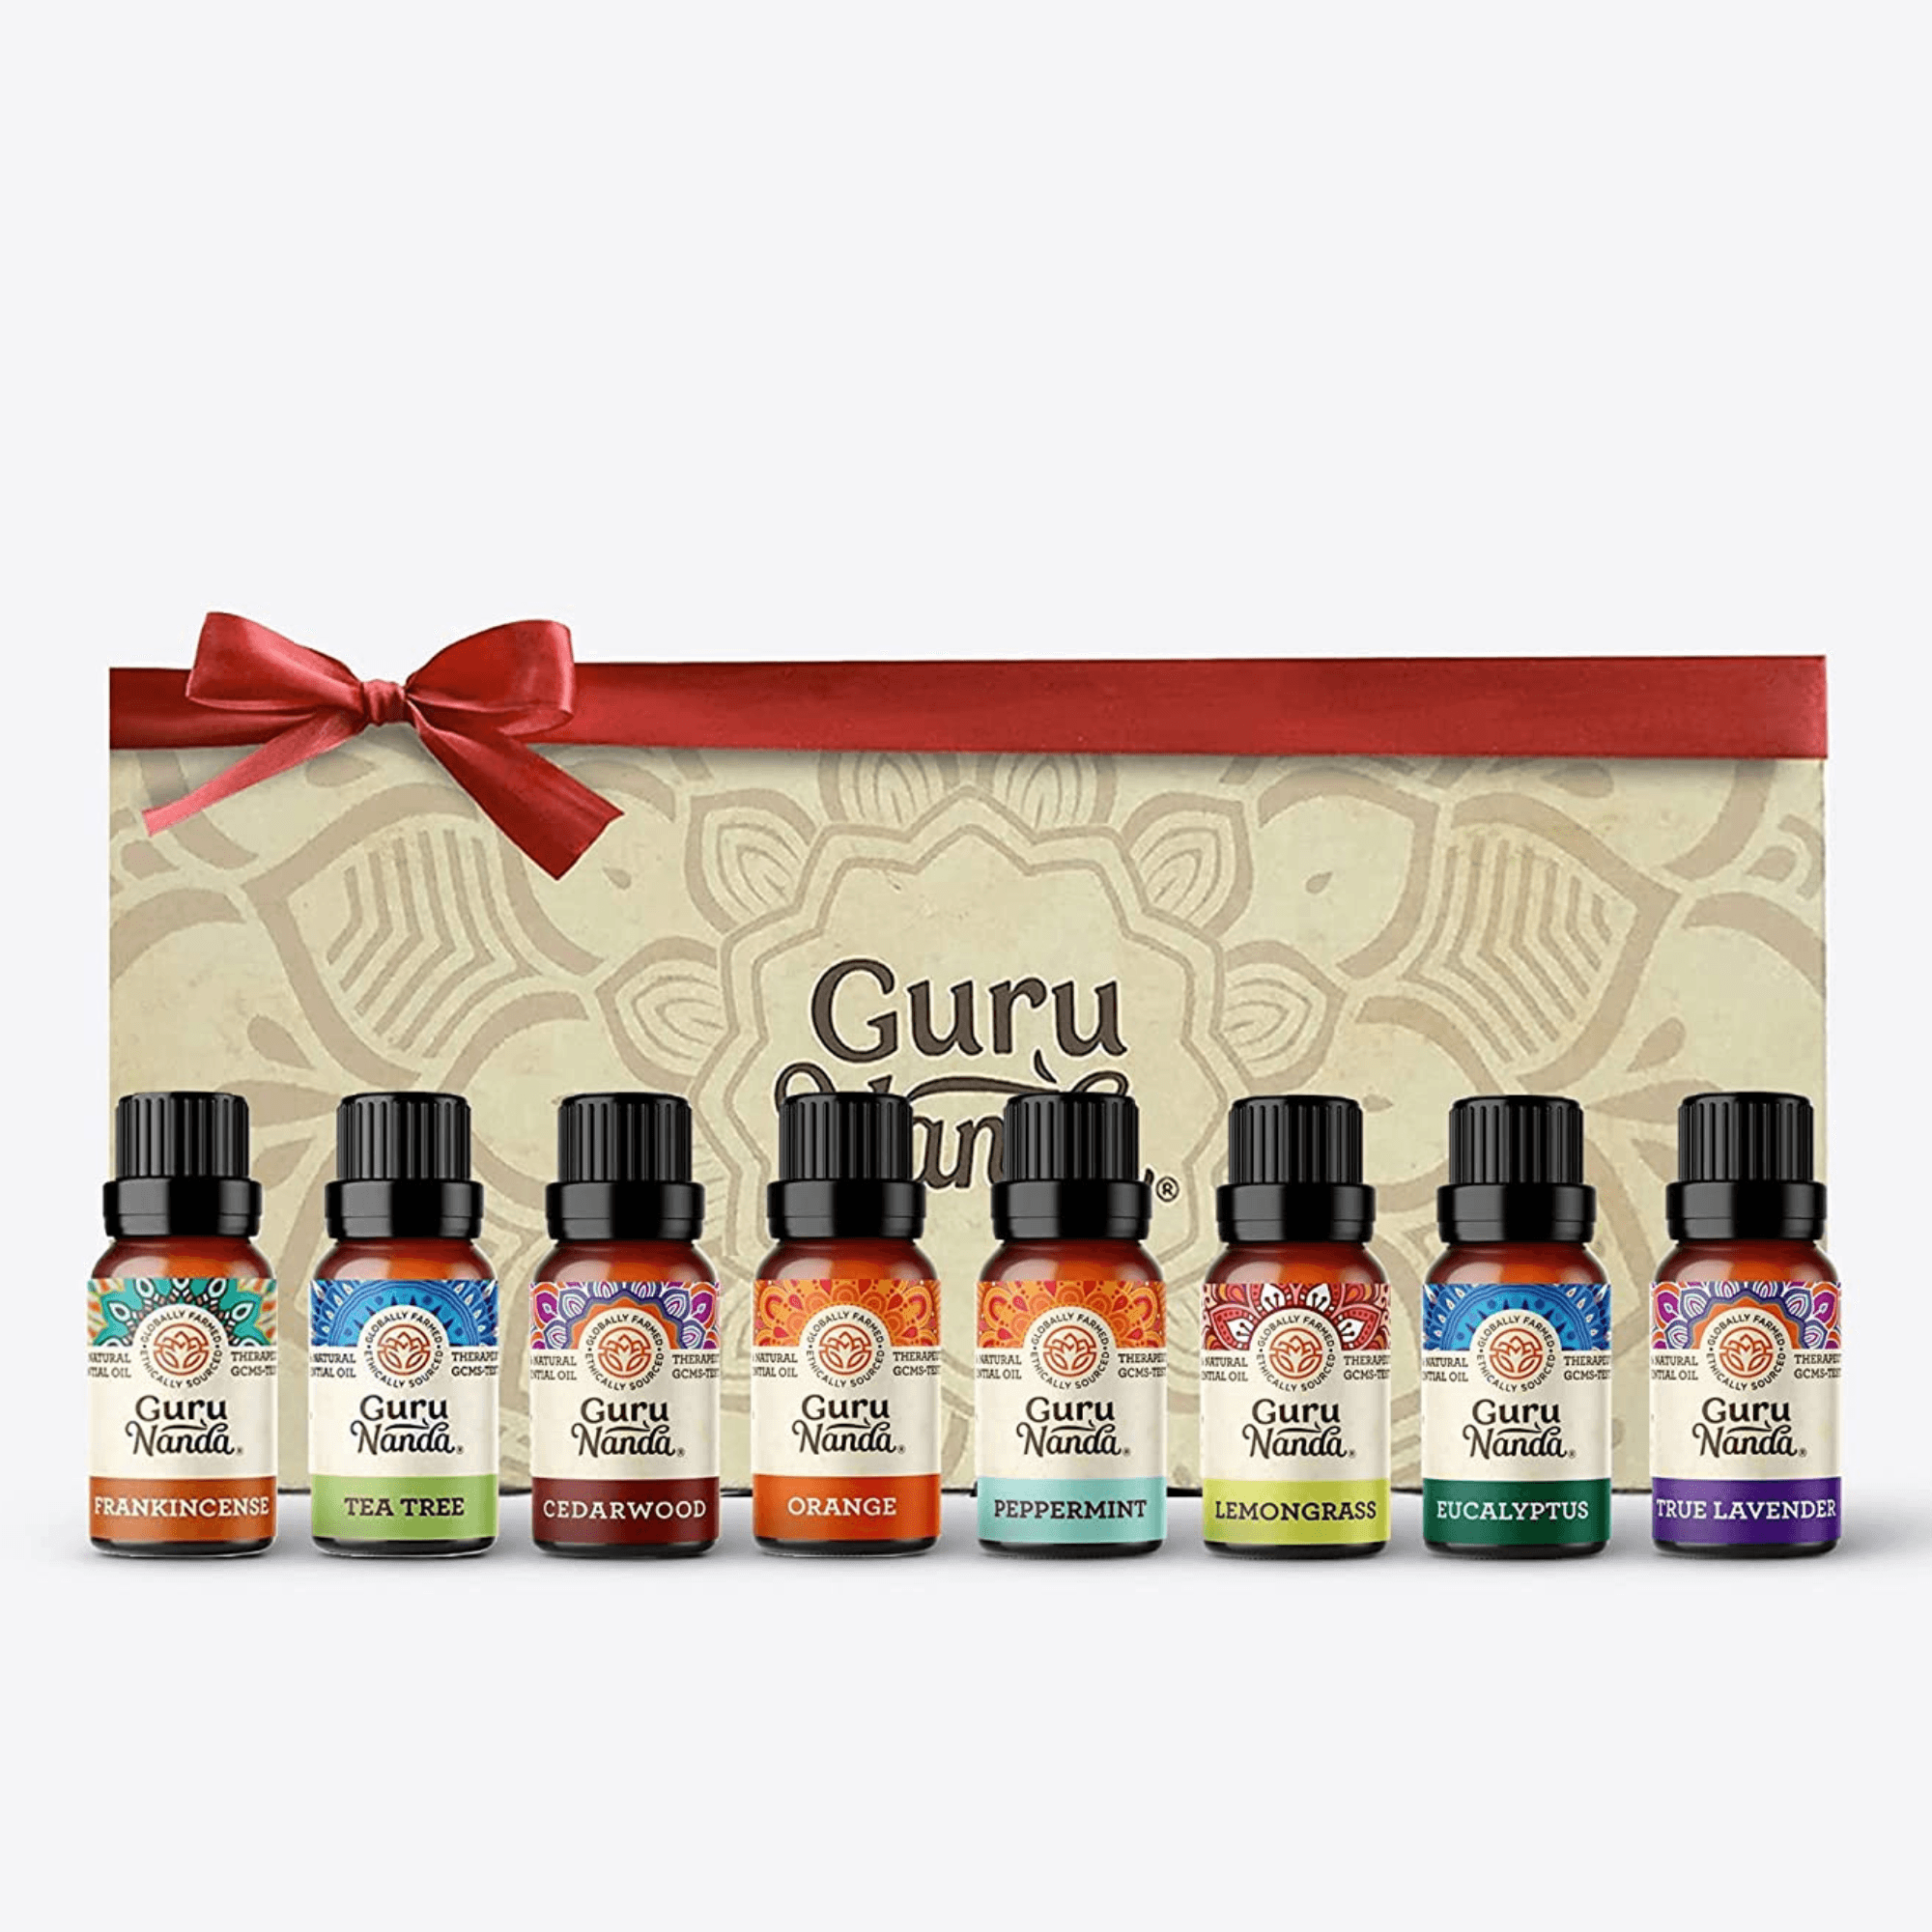 Guru Nanda Essential Oil Blends with Wooden Storage Box- Set of 12 ,  Various Scents, 10ml